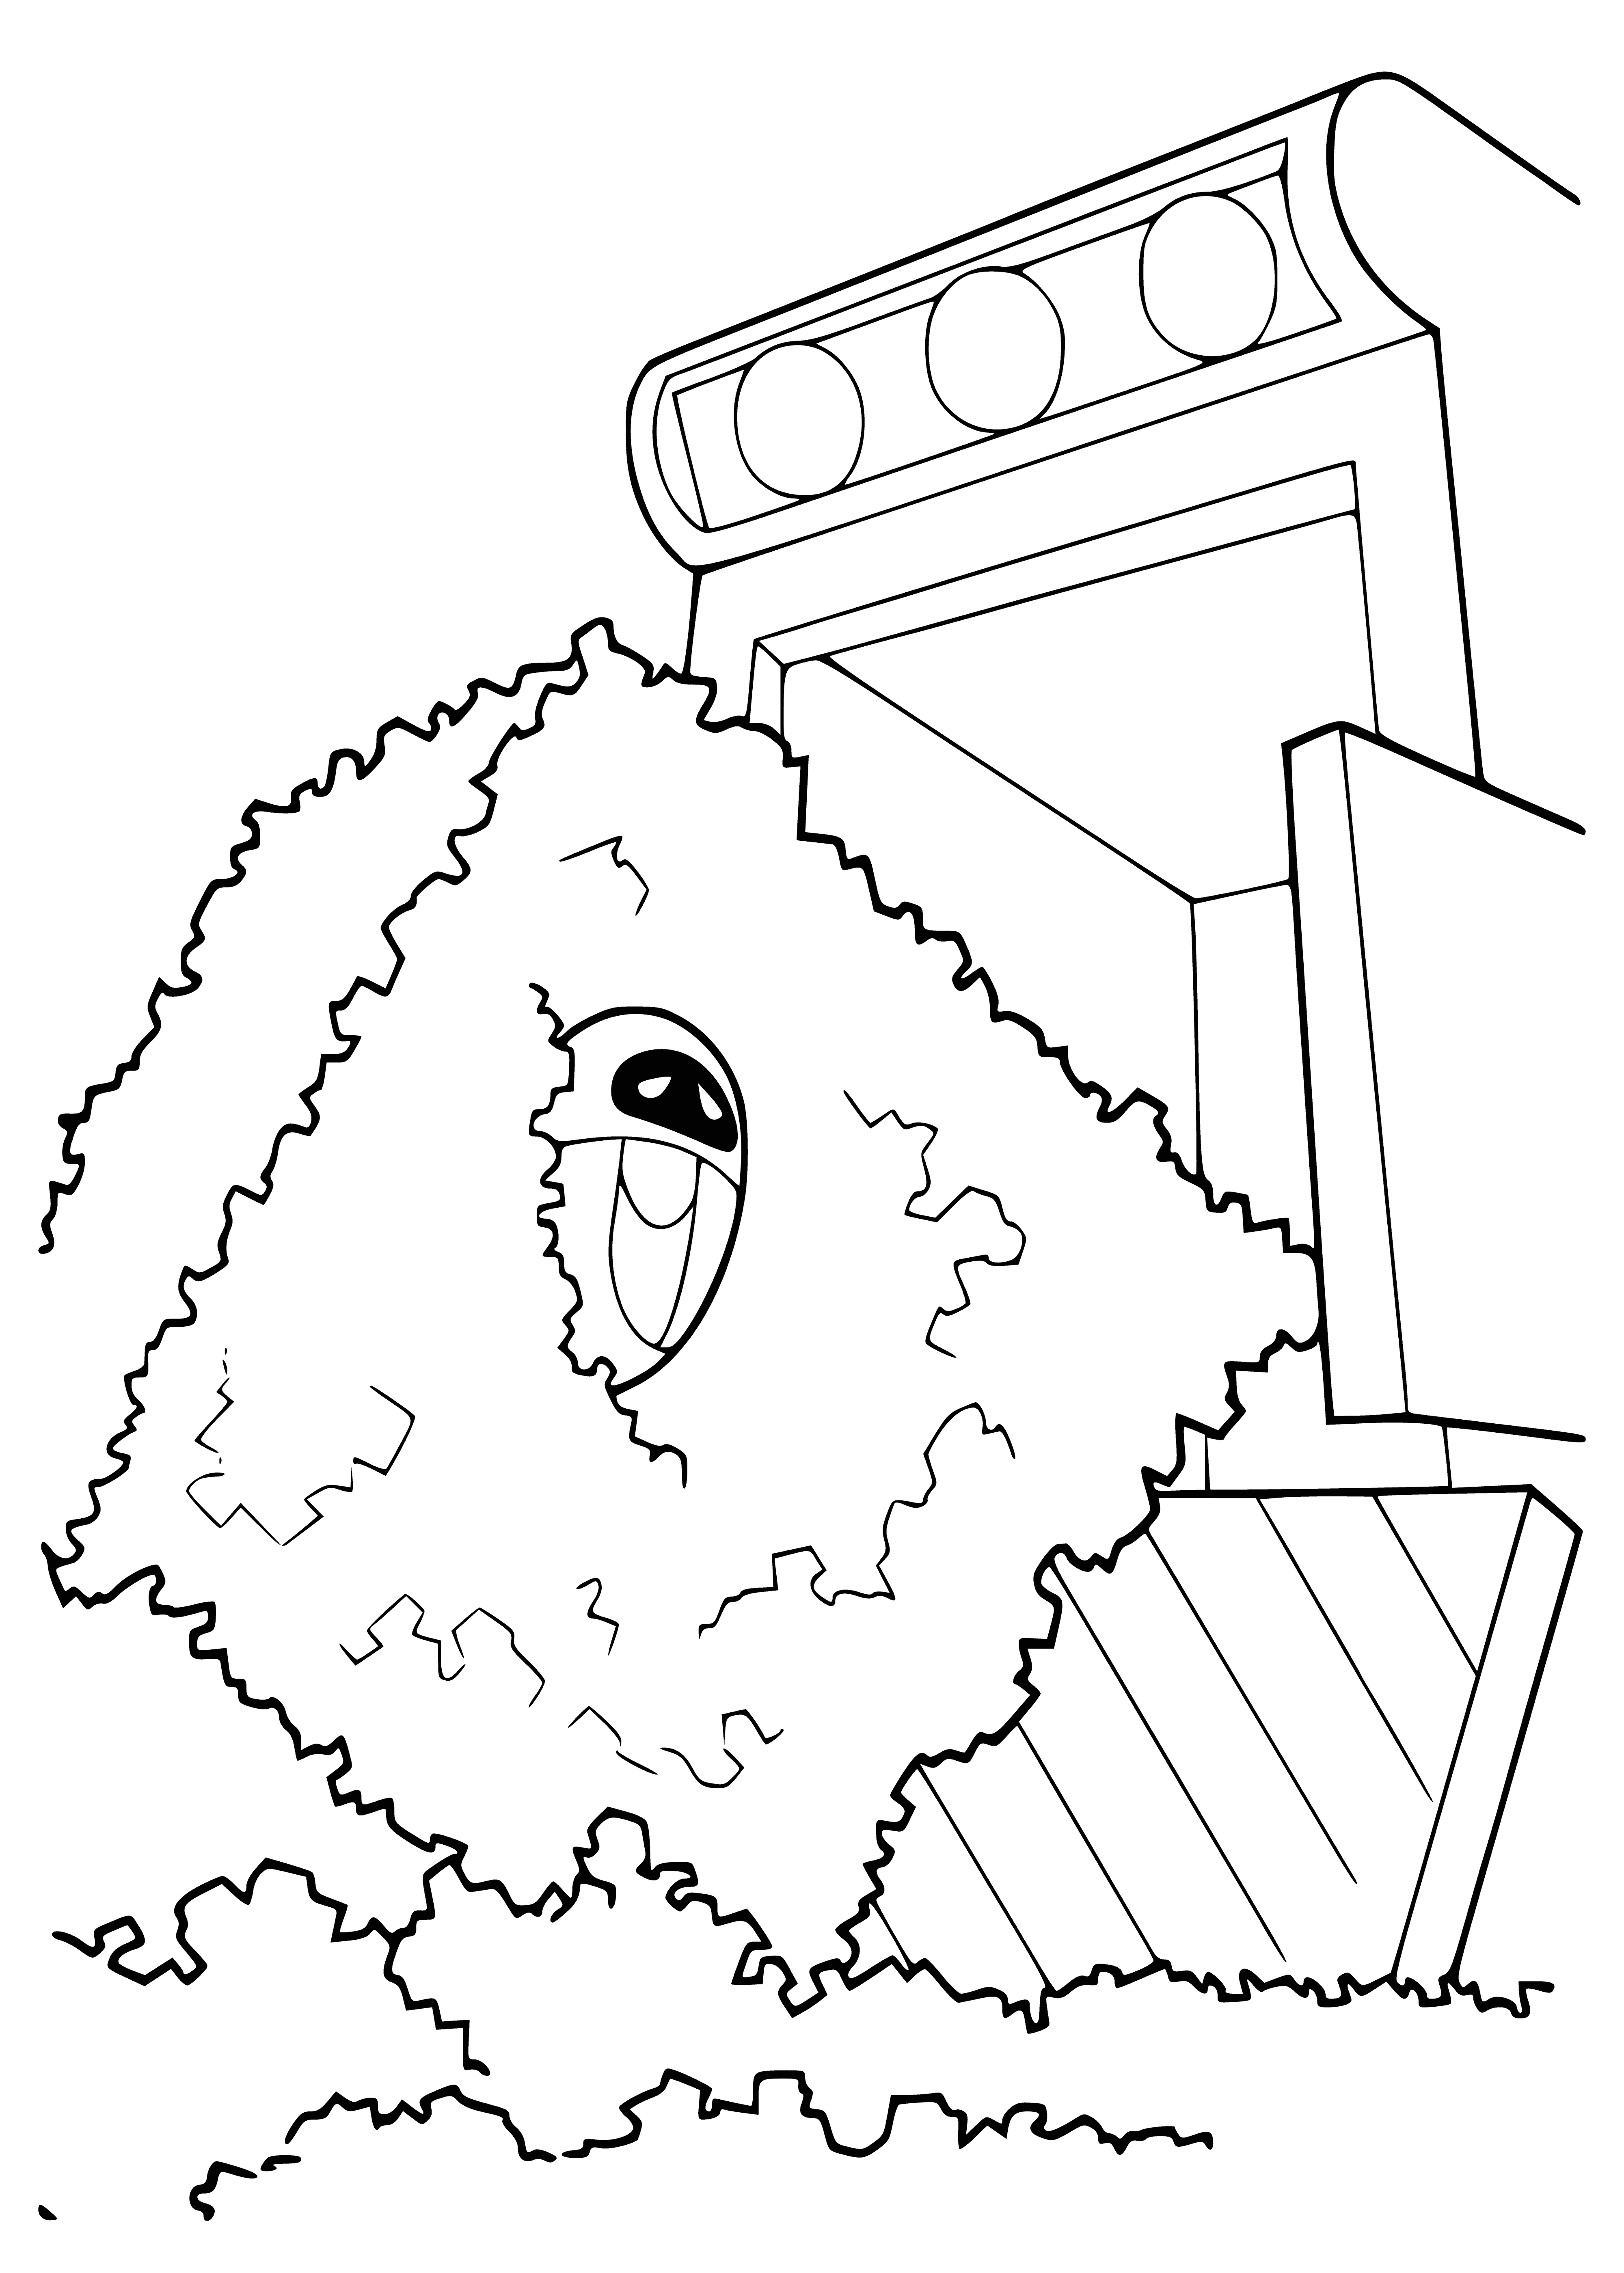 Waste disposal coloring page